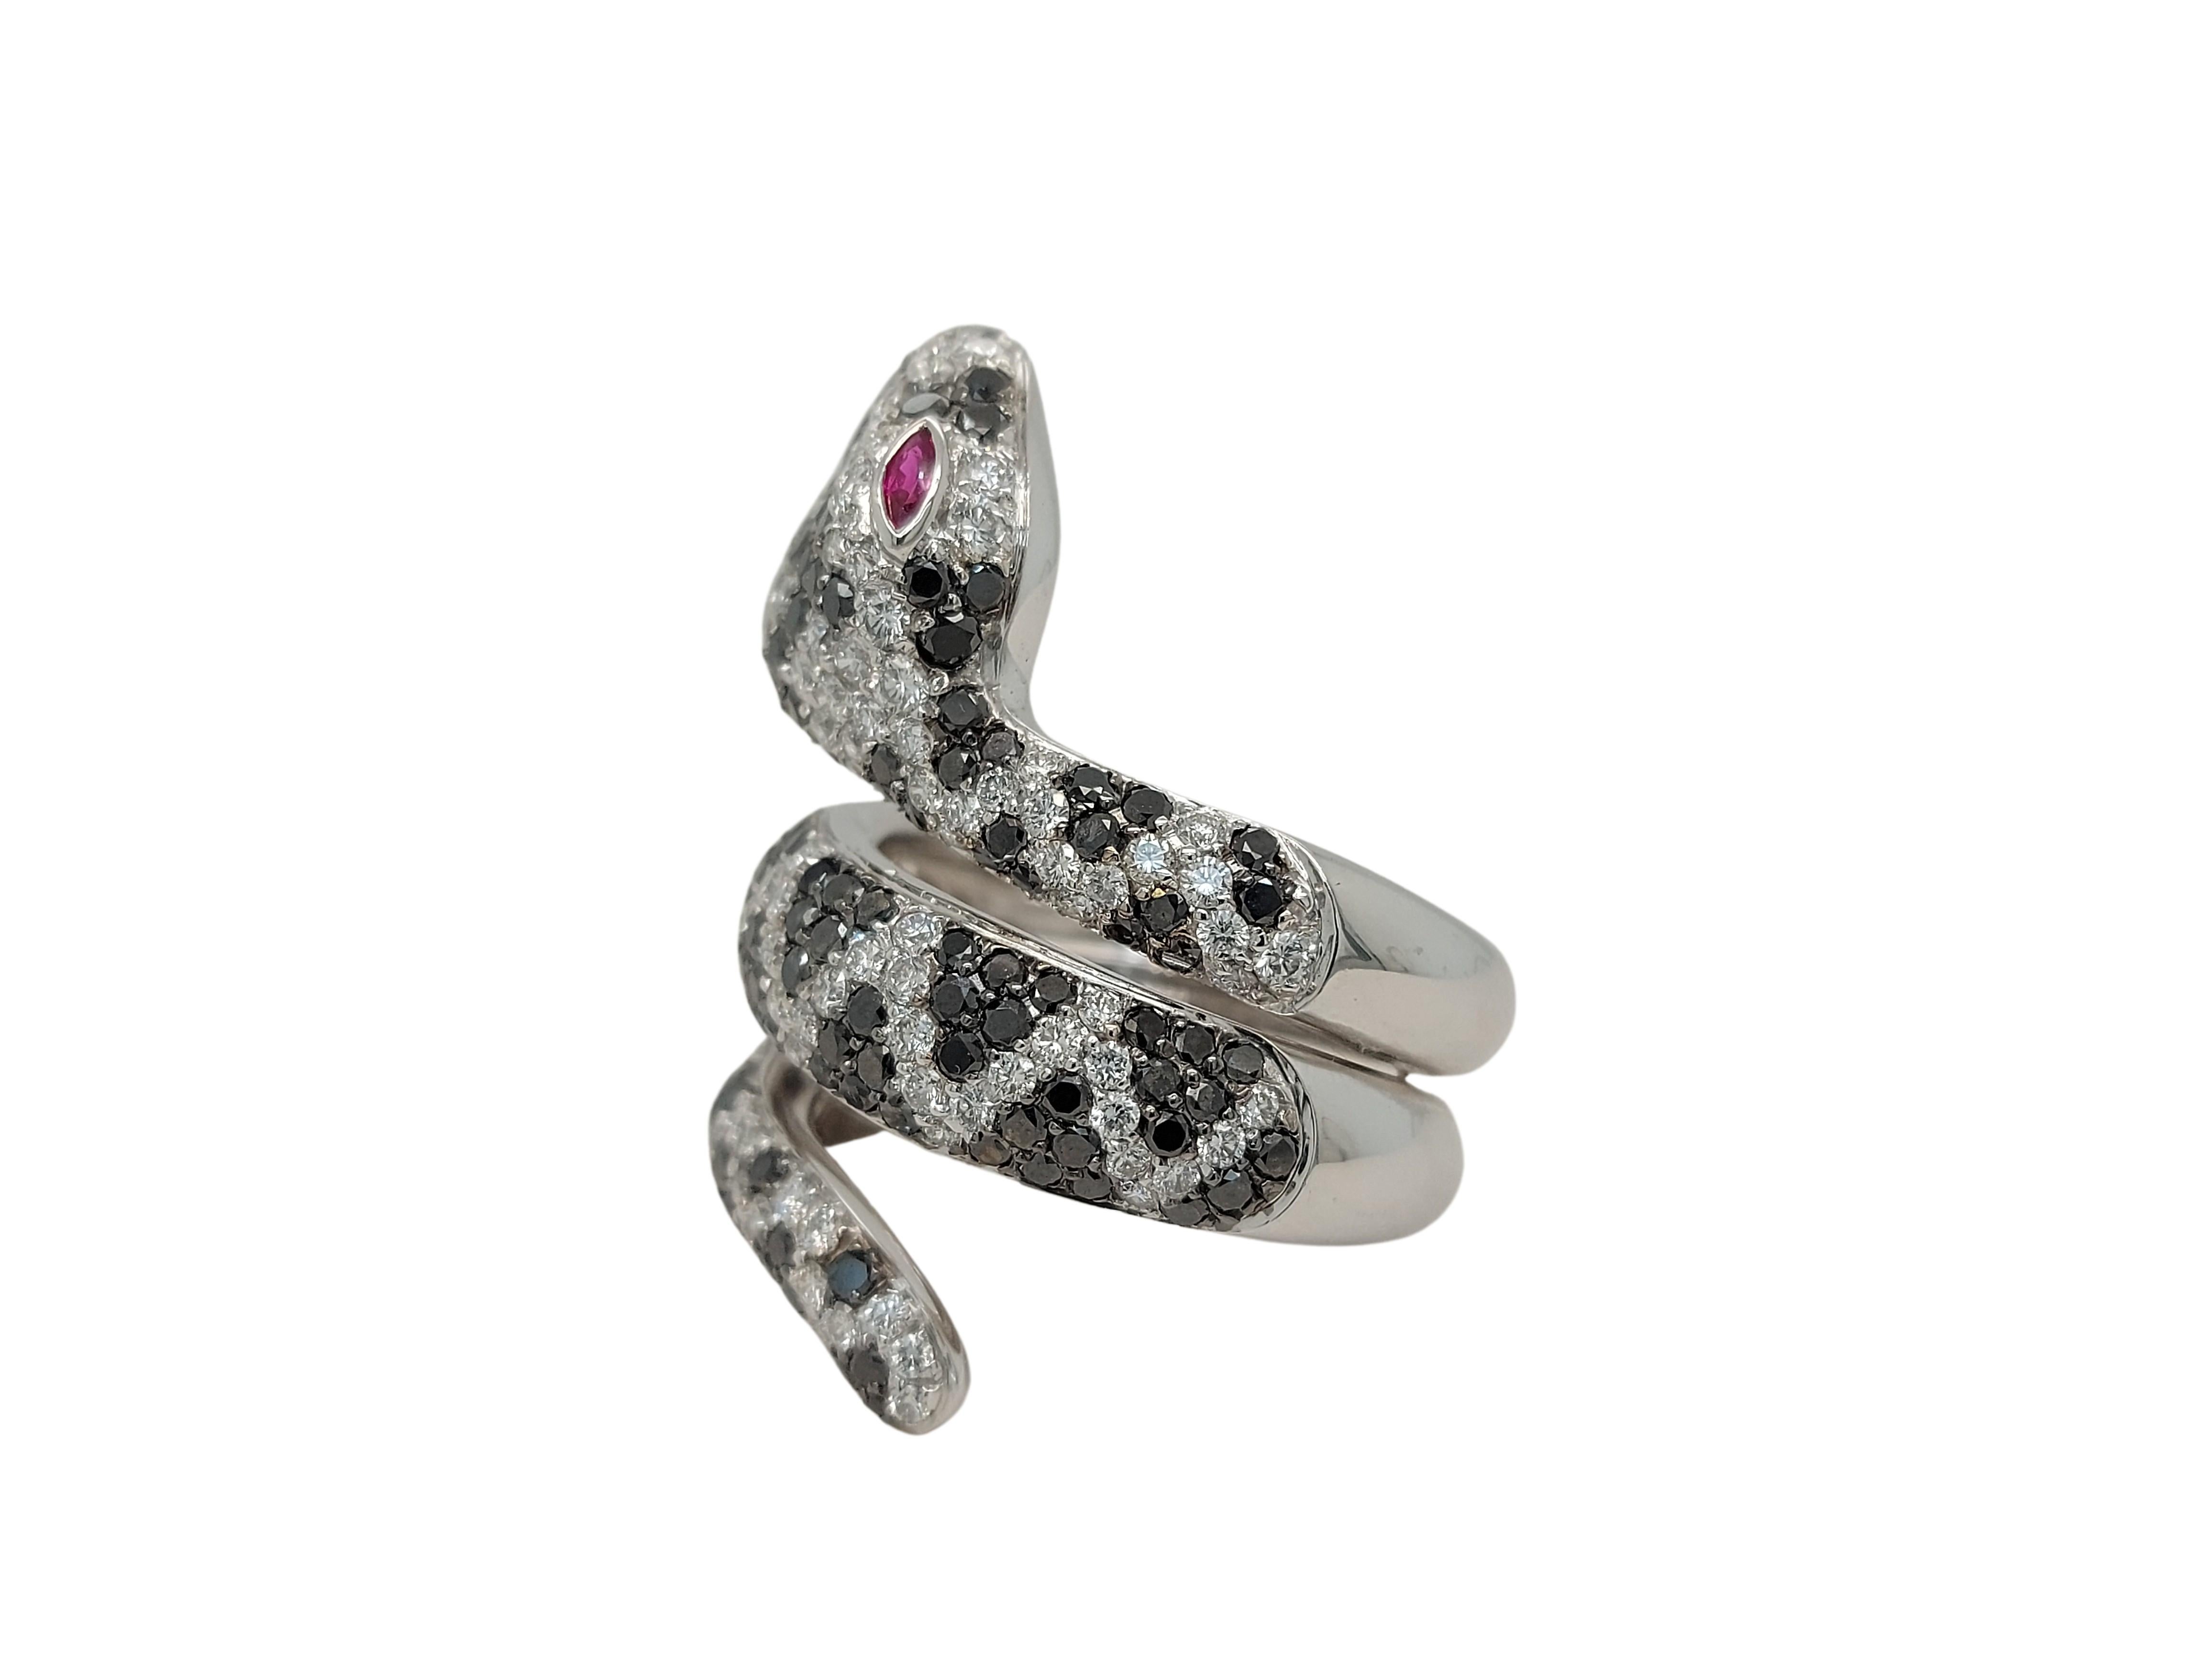 Magnificent 18kt White Gold Snake Ring with 2.04ct Black & 1.75ct White Diamonds & Ruby Eyes

Material: 18kt white gold

Diamonds: 1.75ct white brilliant cut diamonds  and 2.04ct black diamonds

Ruby: 2 little Ruby eyes

Total weight: 21.2 gr /